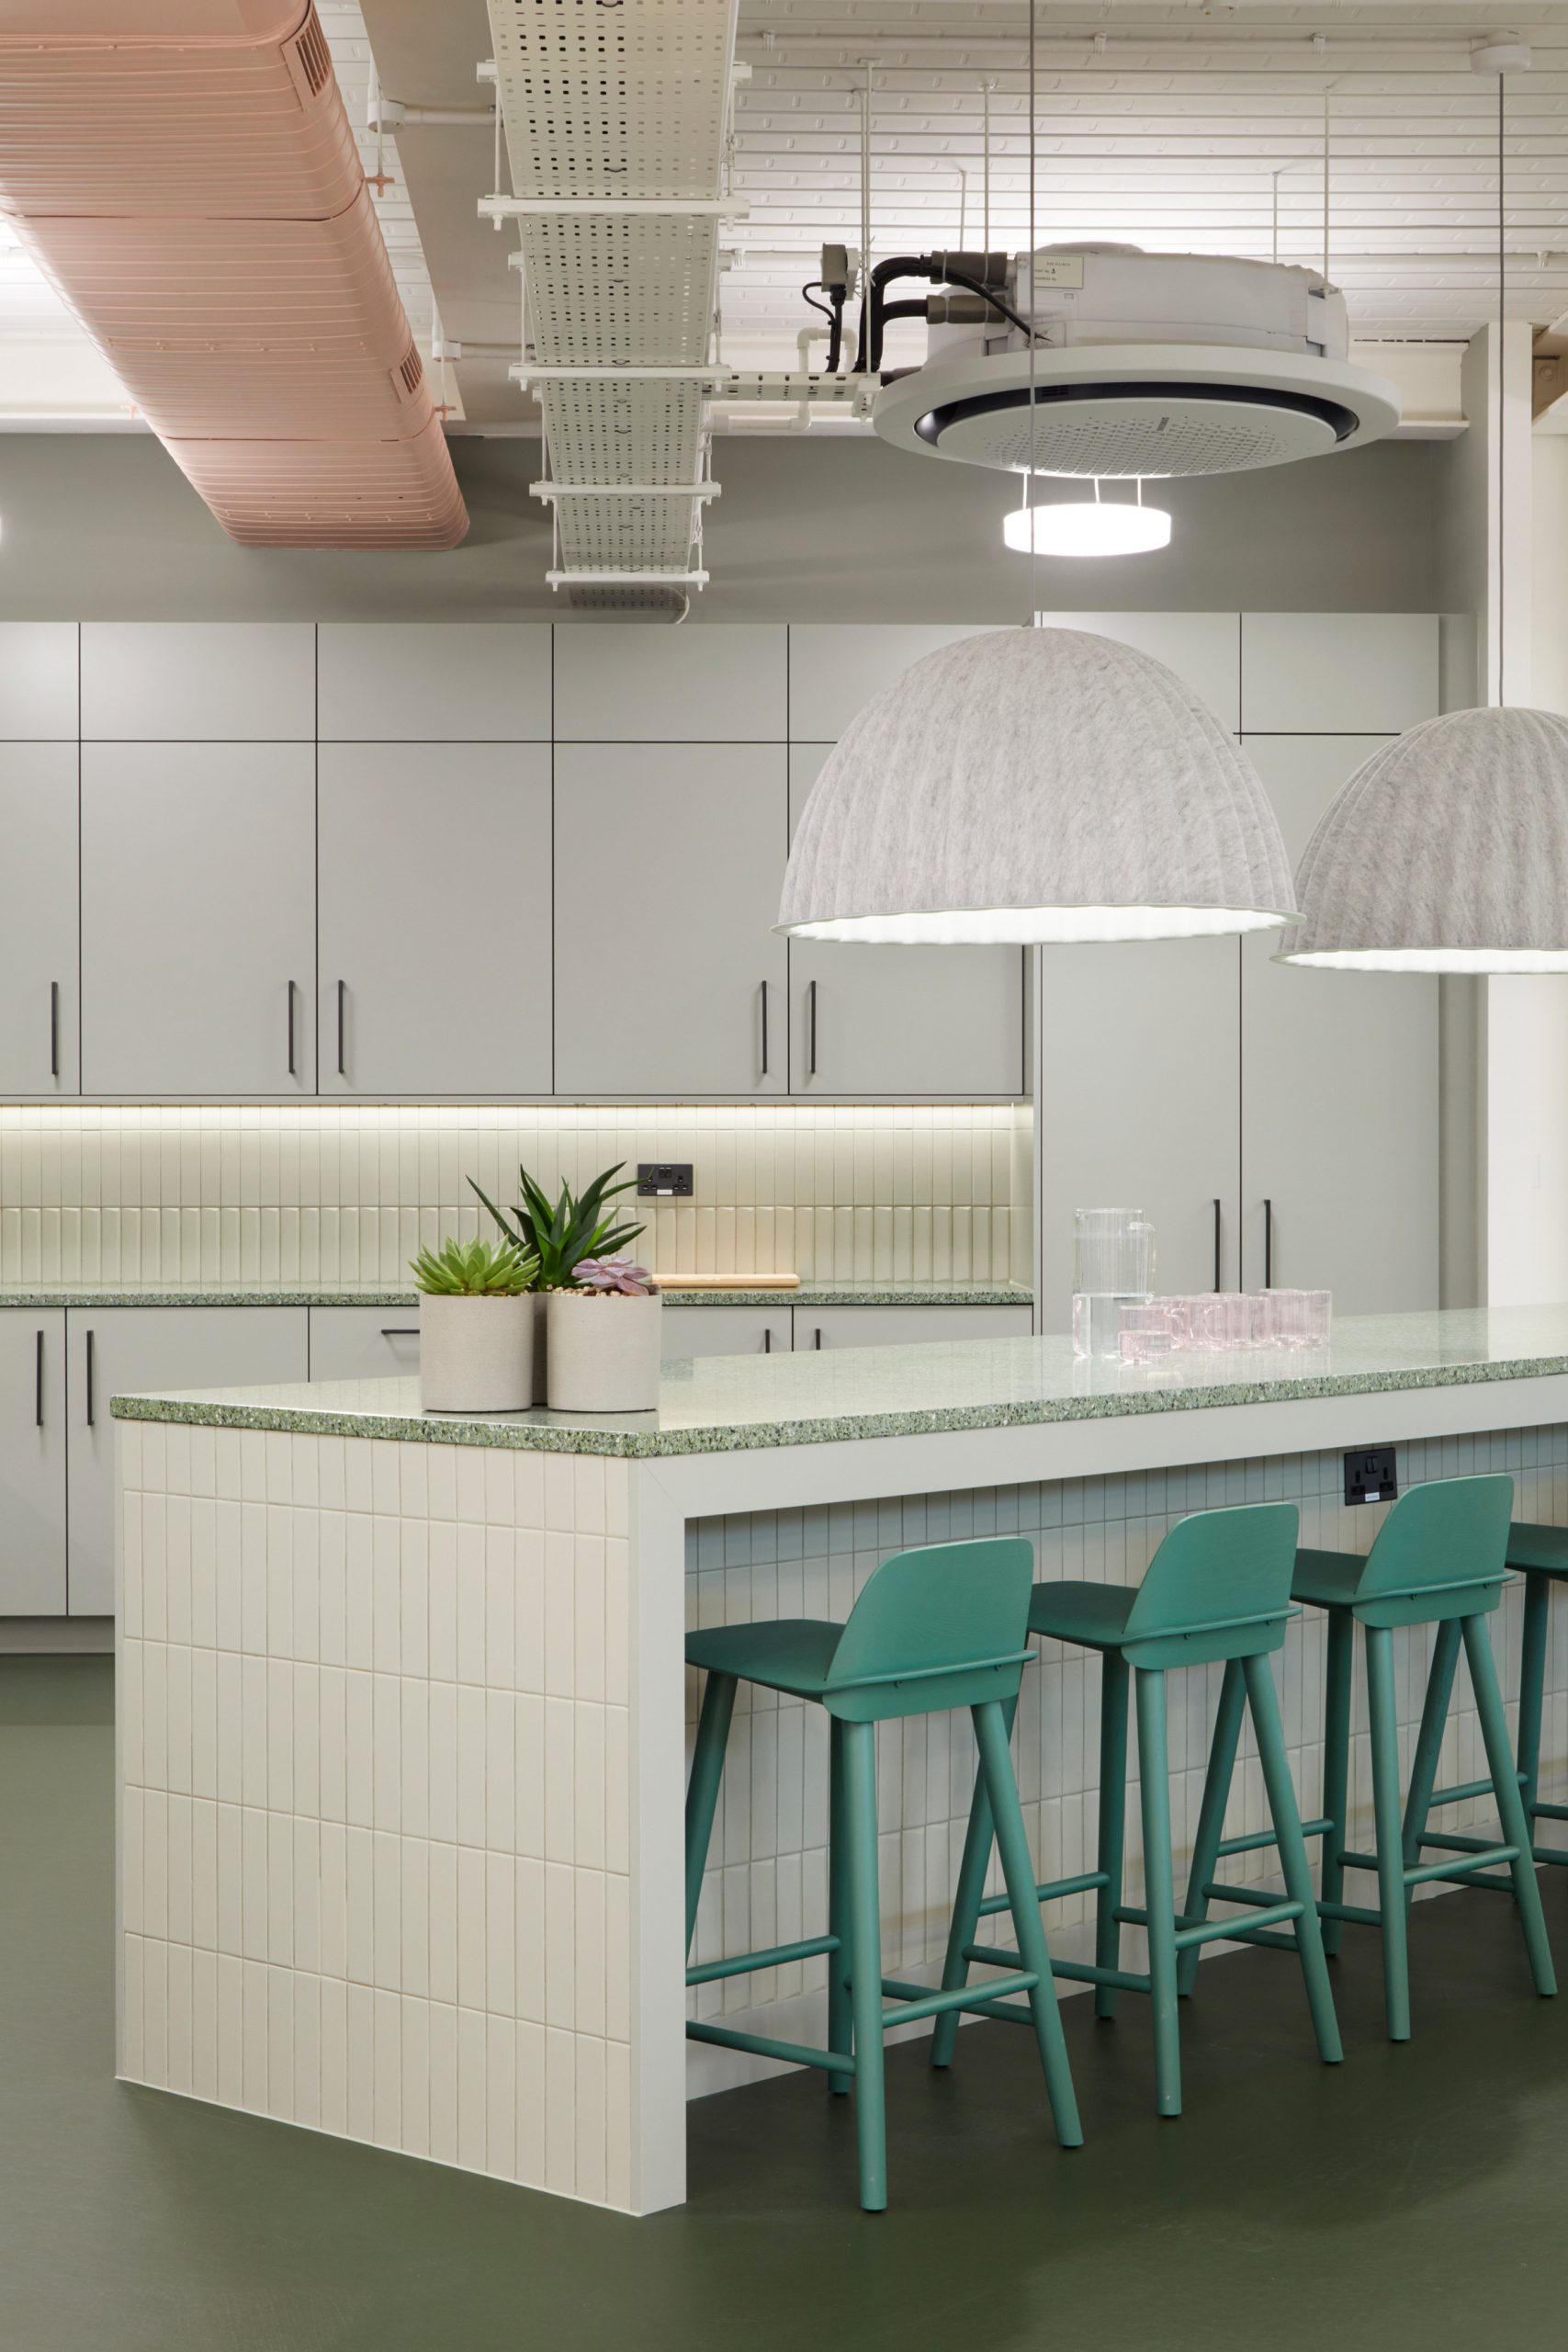 Green stools in office kitchen